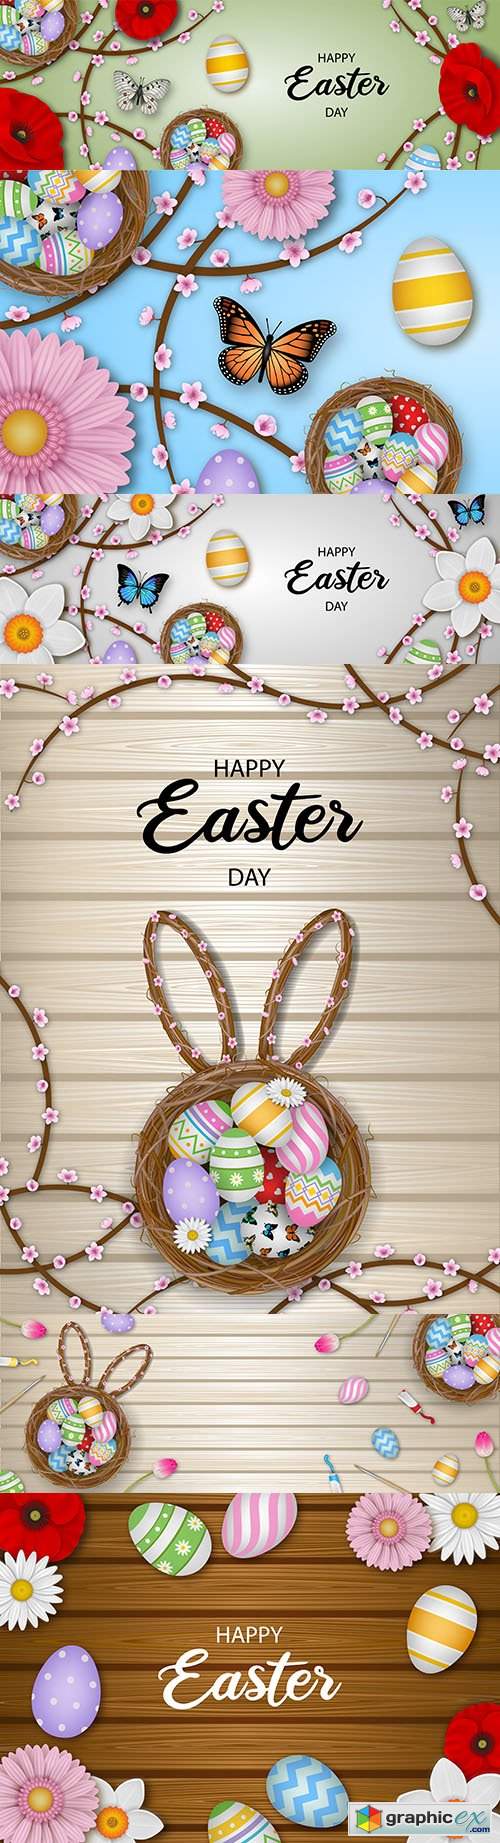  Happy Easter background and design banner with colorful eggs 3 